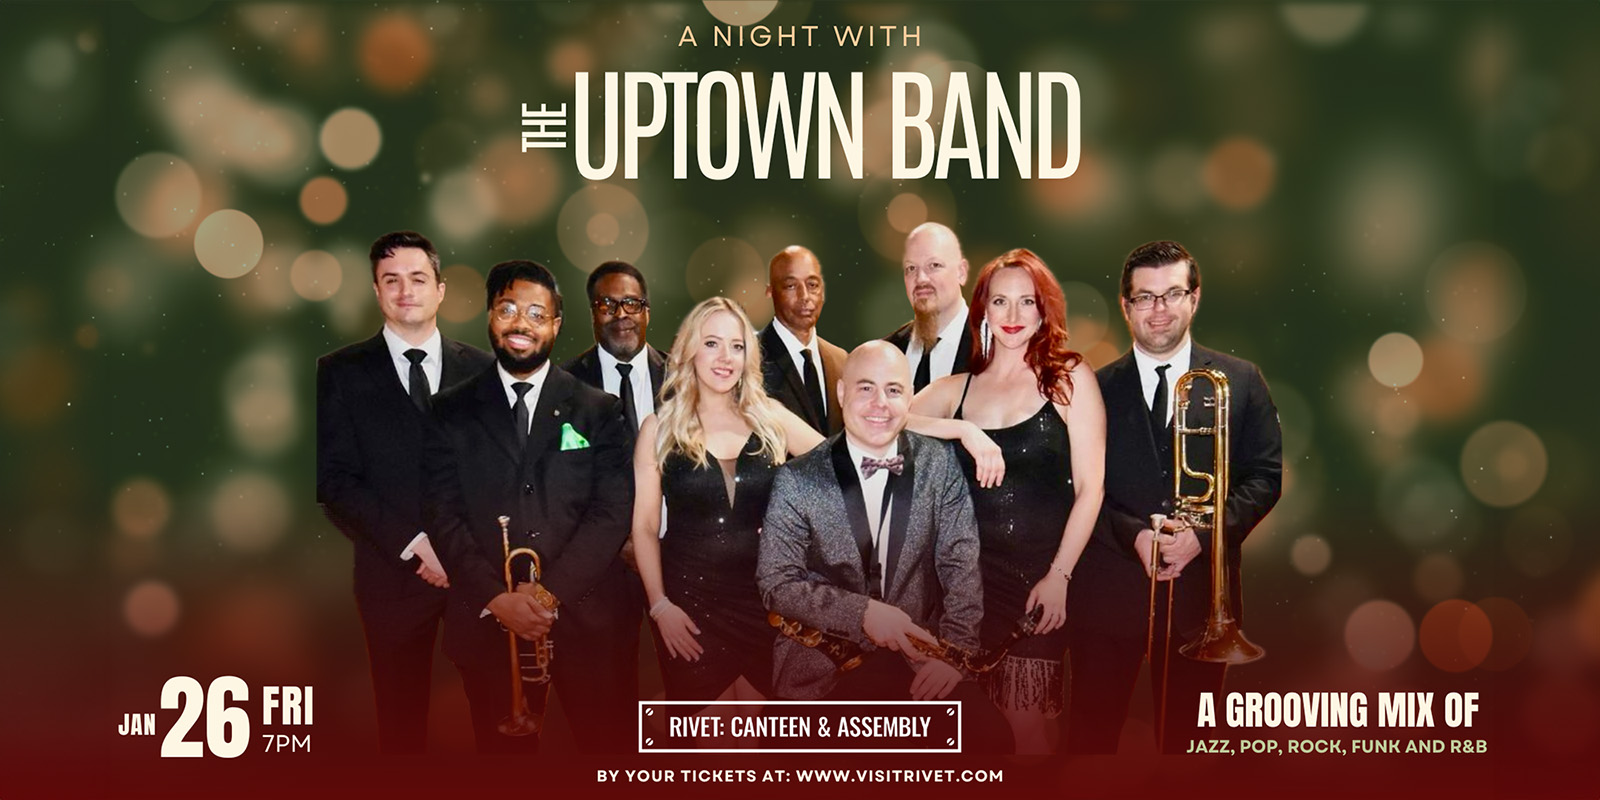 The Uptown Band returns to Rivet: Canteen & Assembly on Friday, January 26th, 2024. A grooving mix of jazz, pop, rock, funk, and R&B! All ages welcome. Doors at 7:00PM.